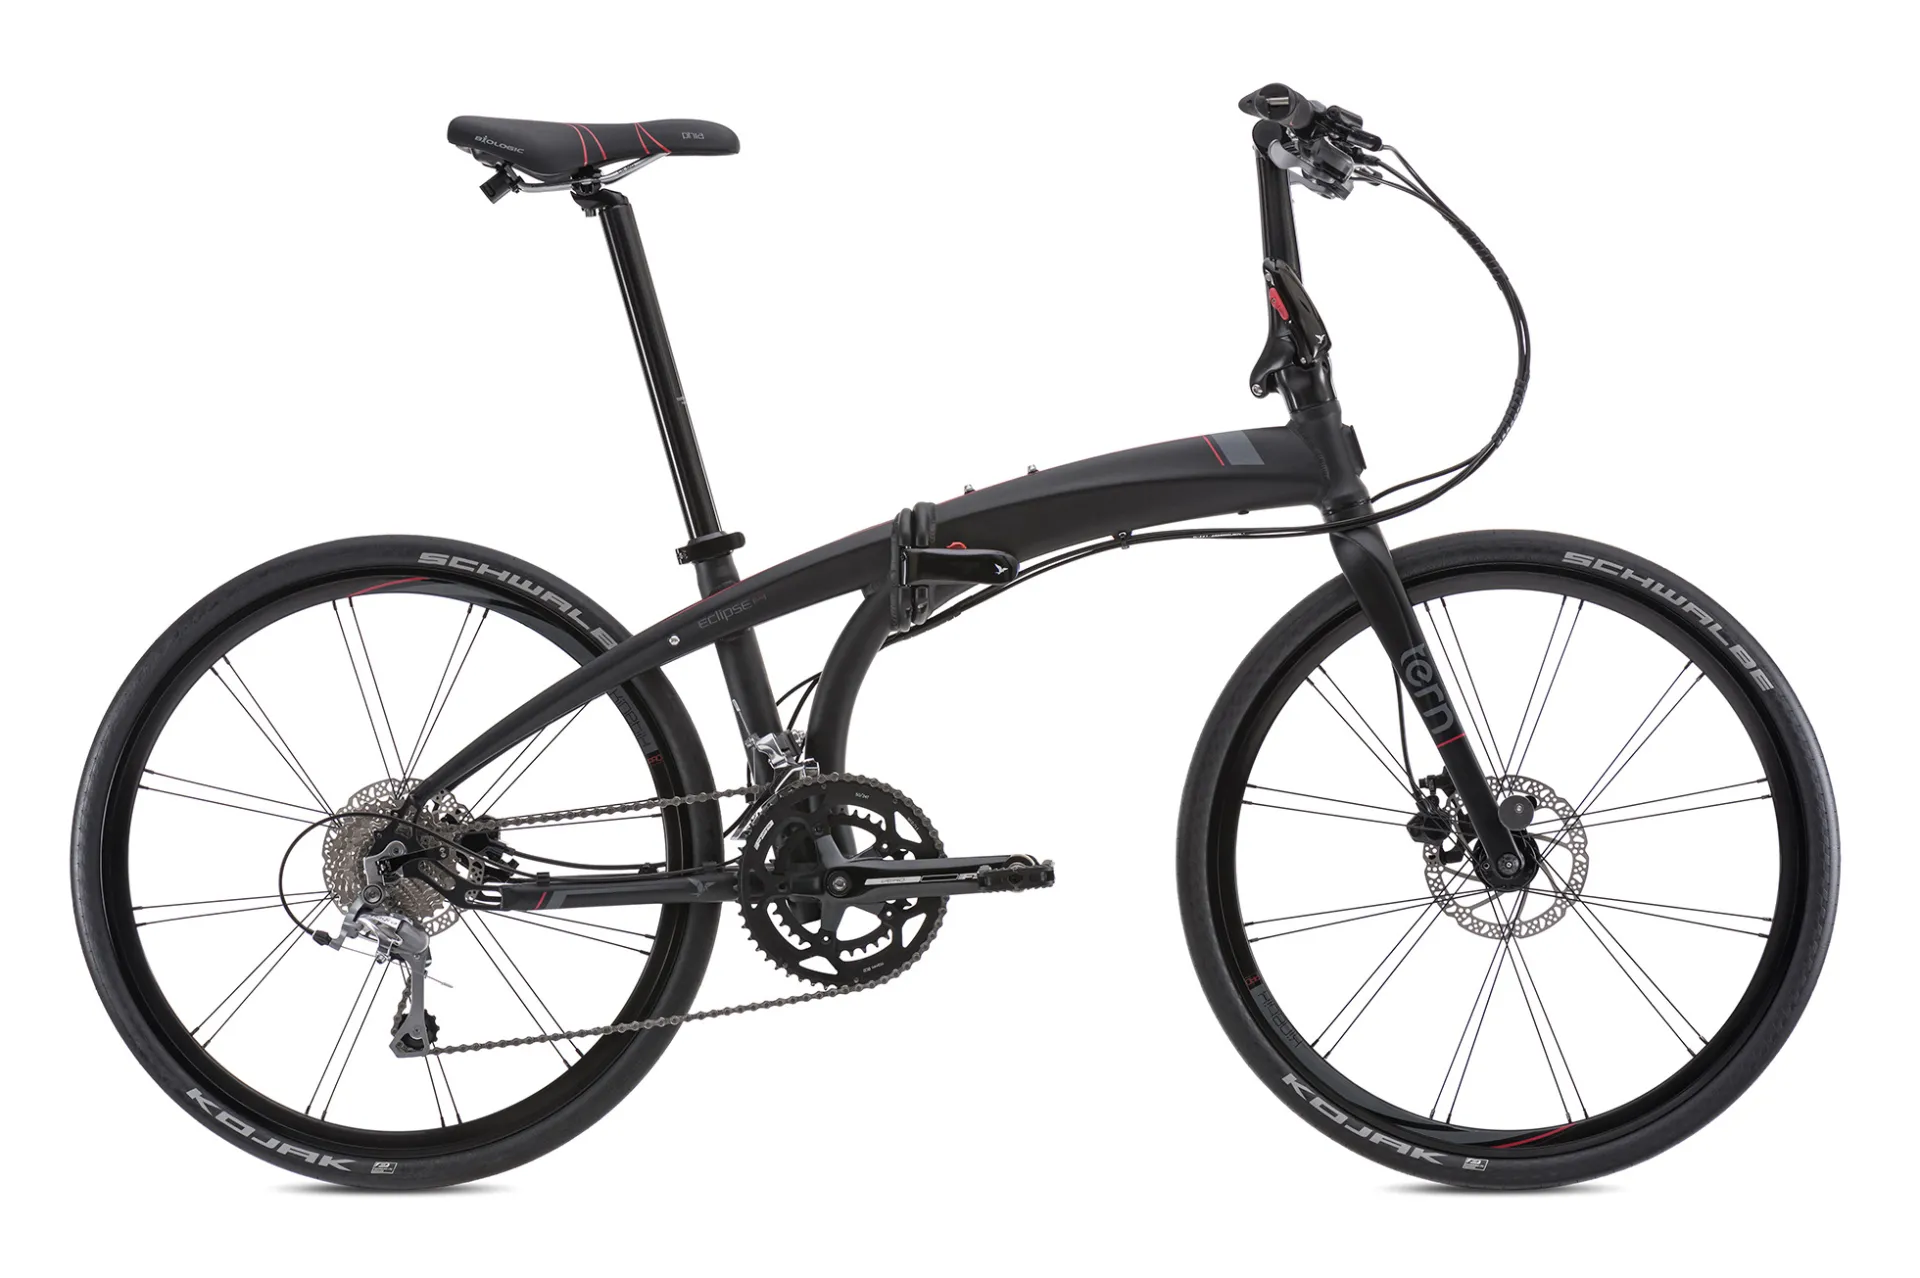 Eclipse P20 - Full size folding bicycle